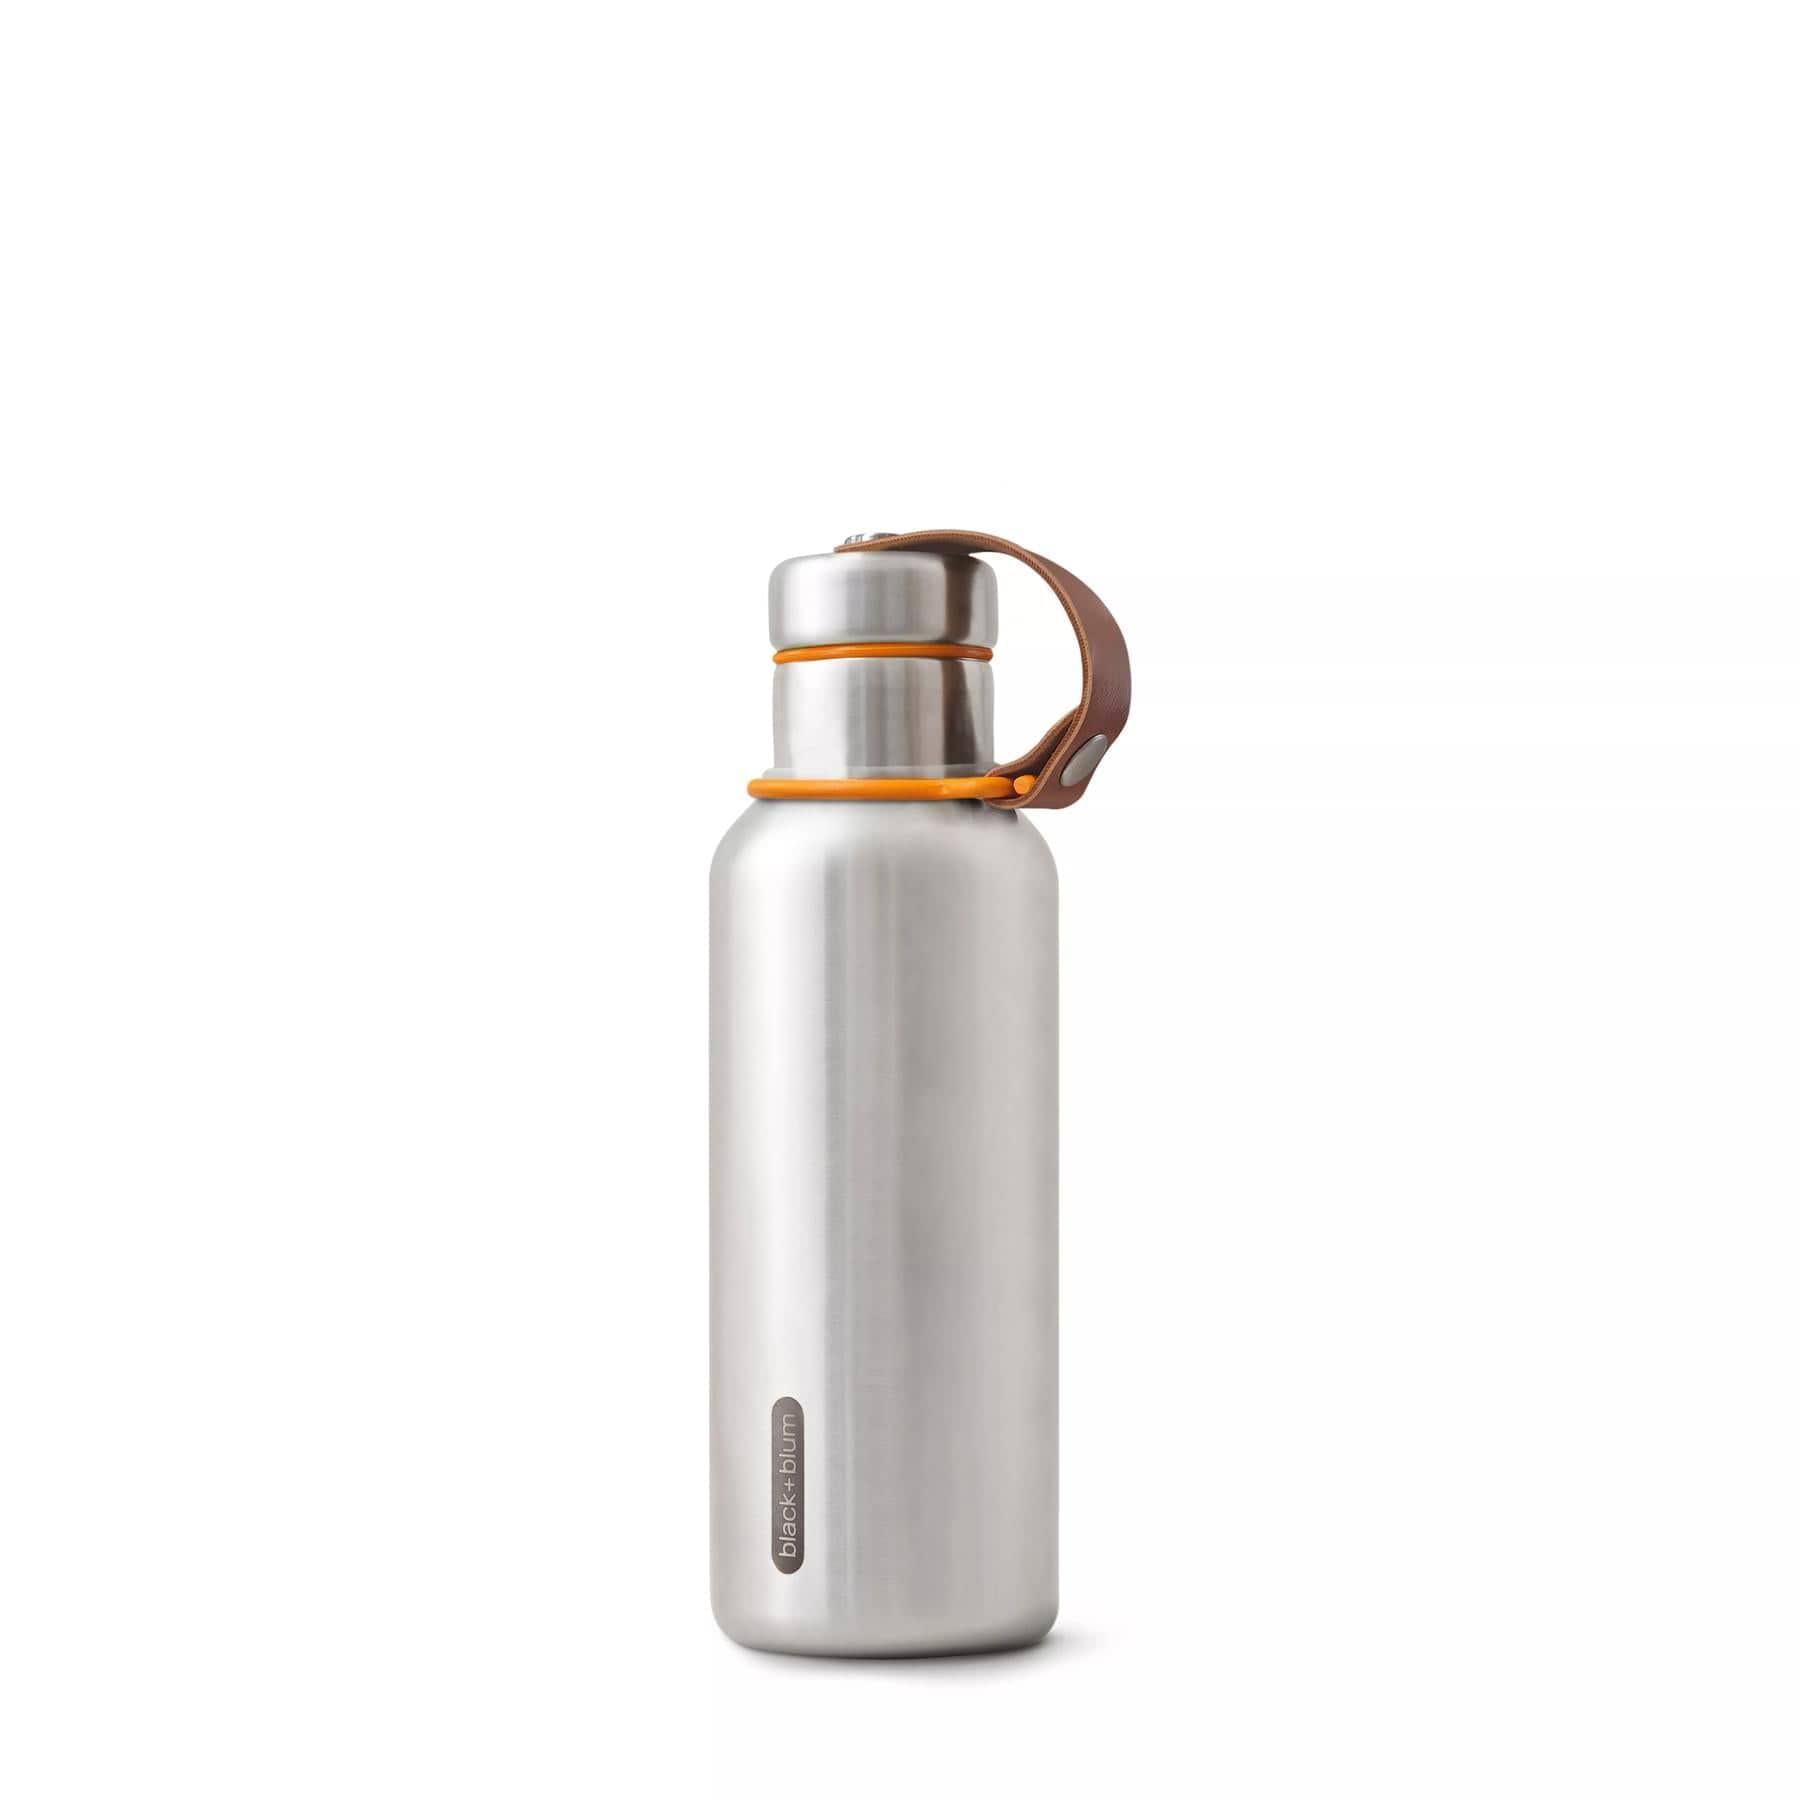 Stainless steel insulated water bottle with wooden cap and leather strap on white background